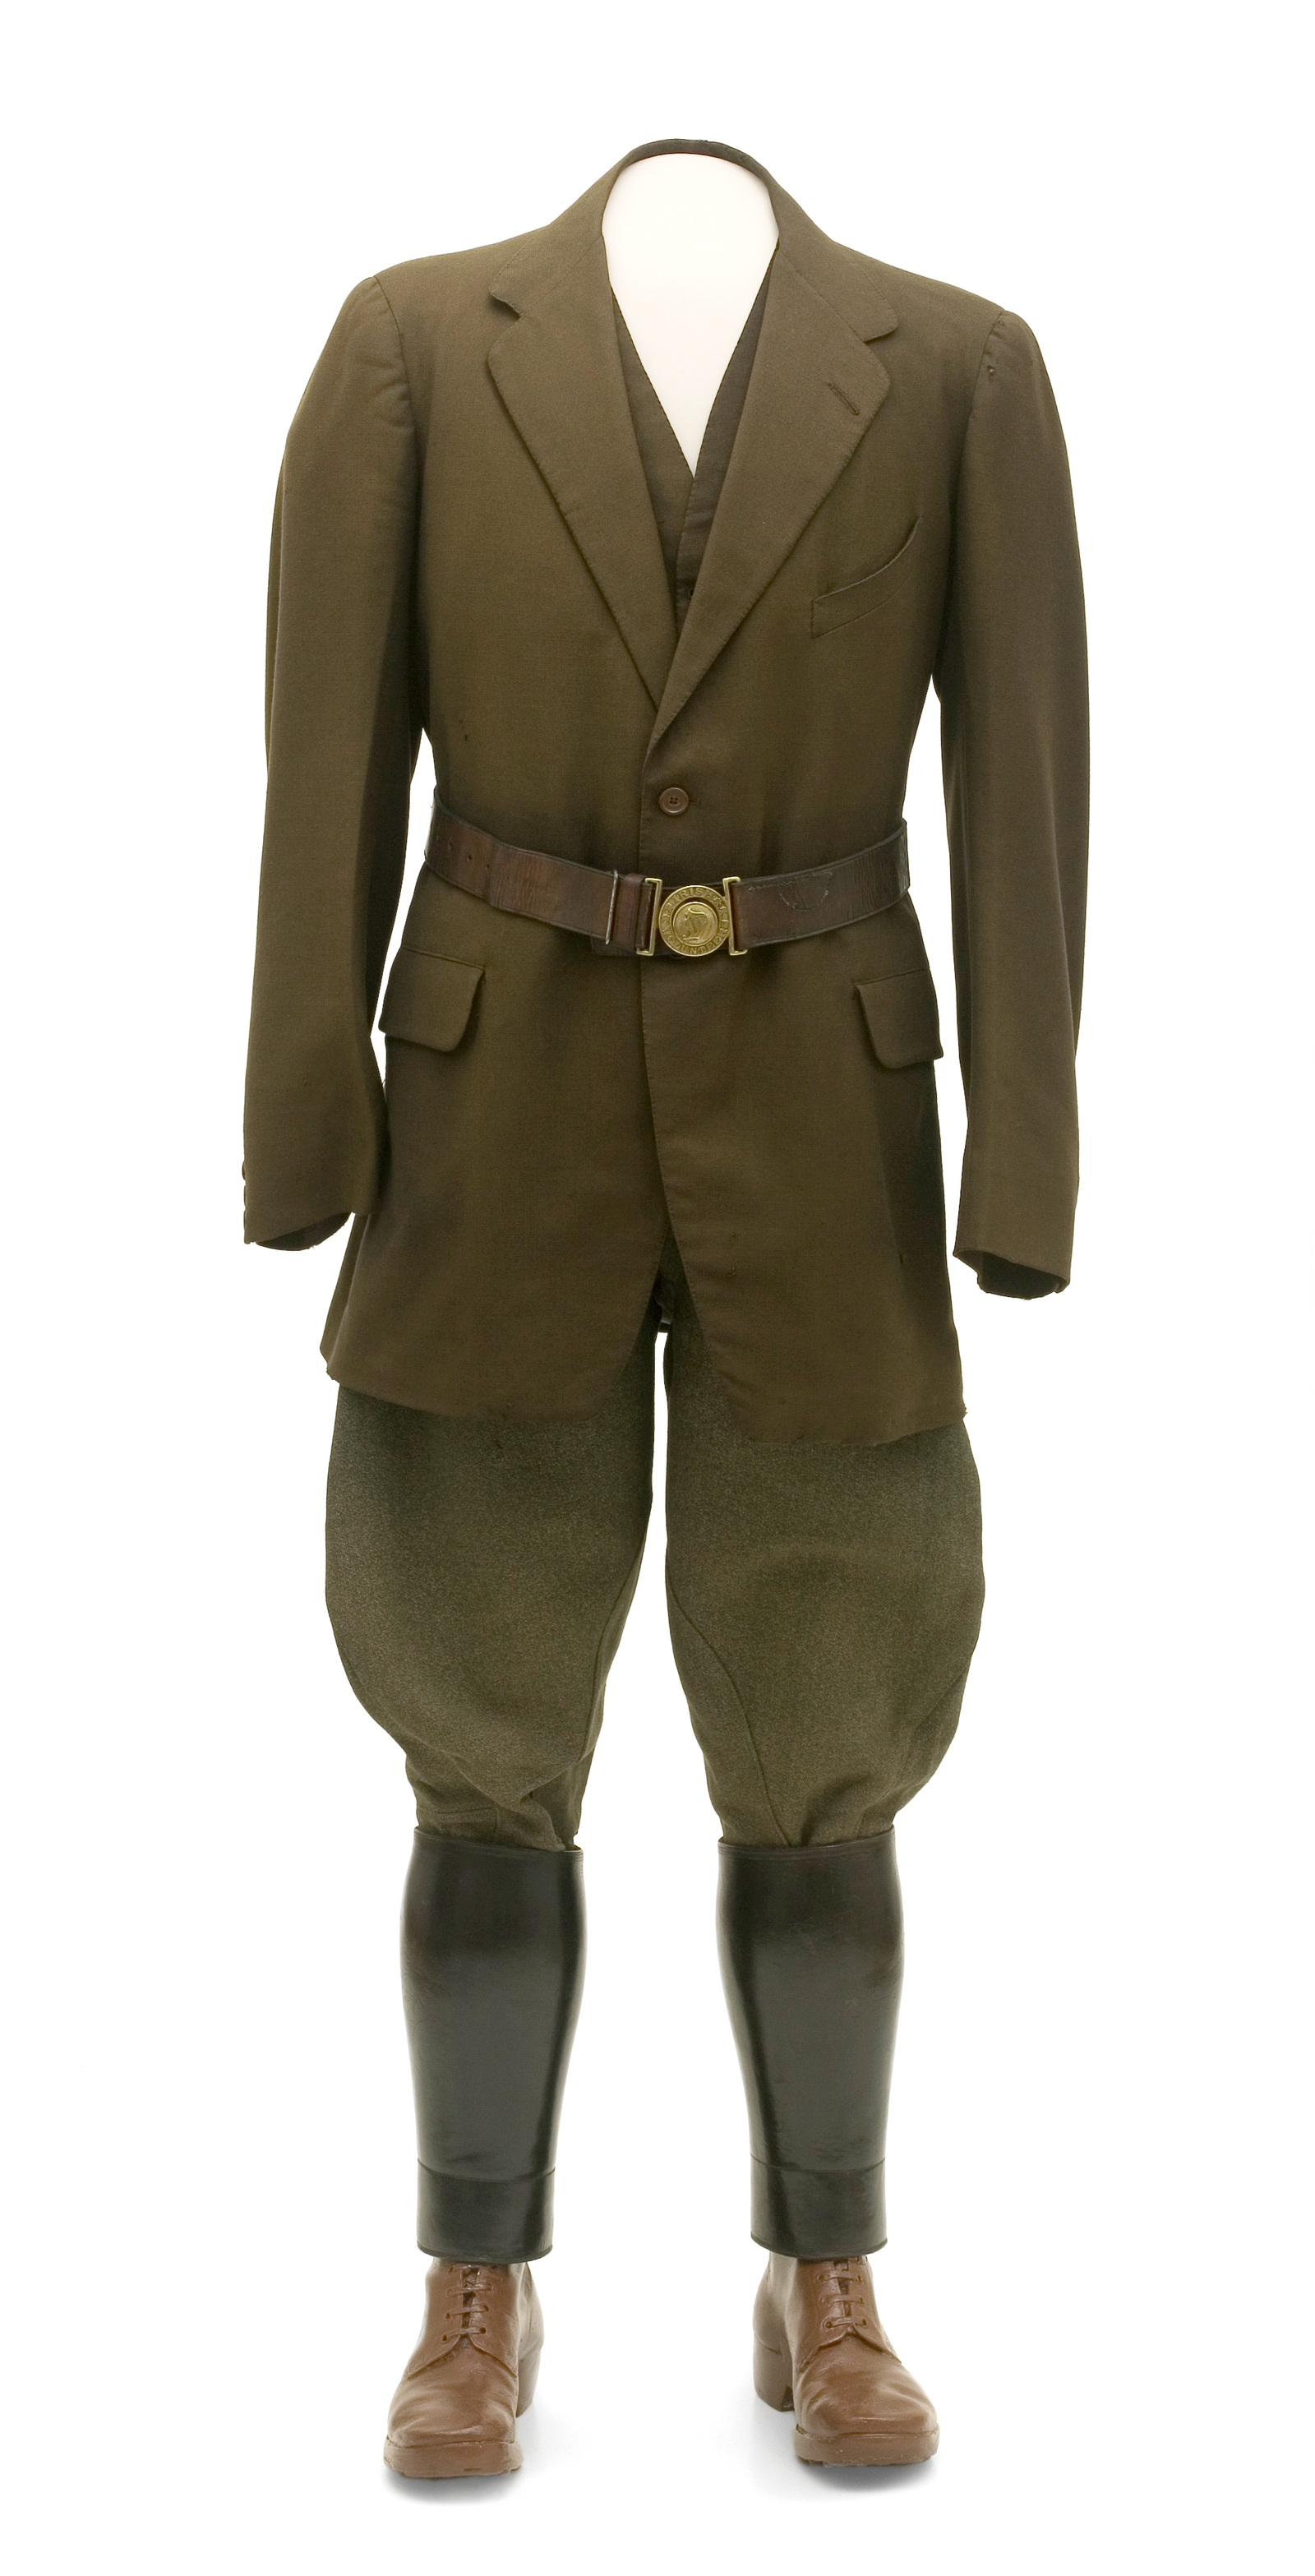 Image - Liam Lynch's uniform, as worn on the day of his death. The boots look new - his comrade Jerry Kirwan had repaired them just before Lynch's death. (Credit: National Museum of Ireland)